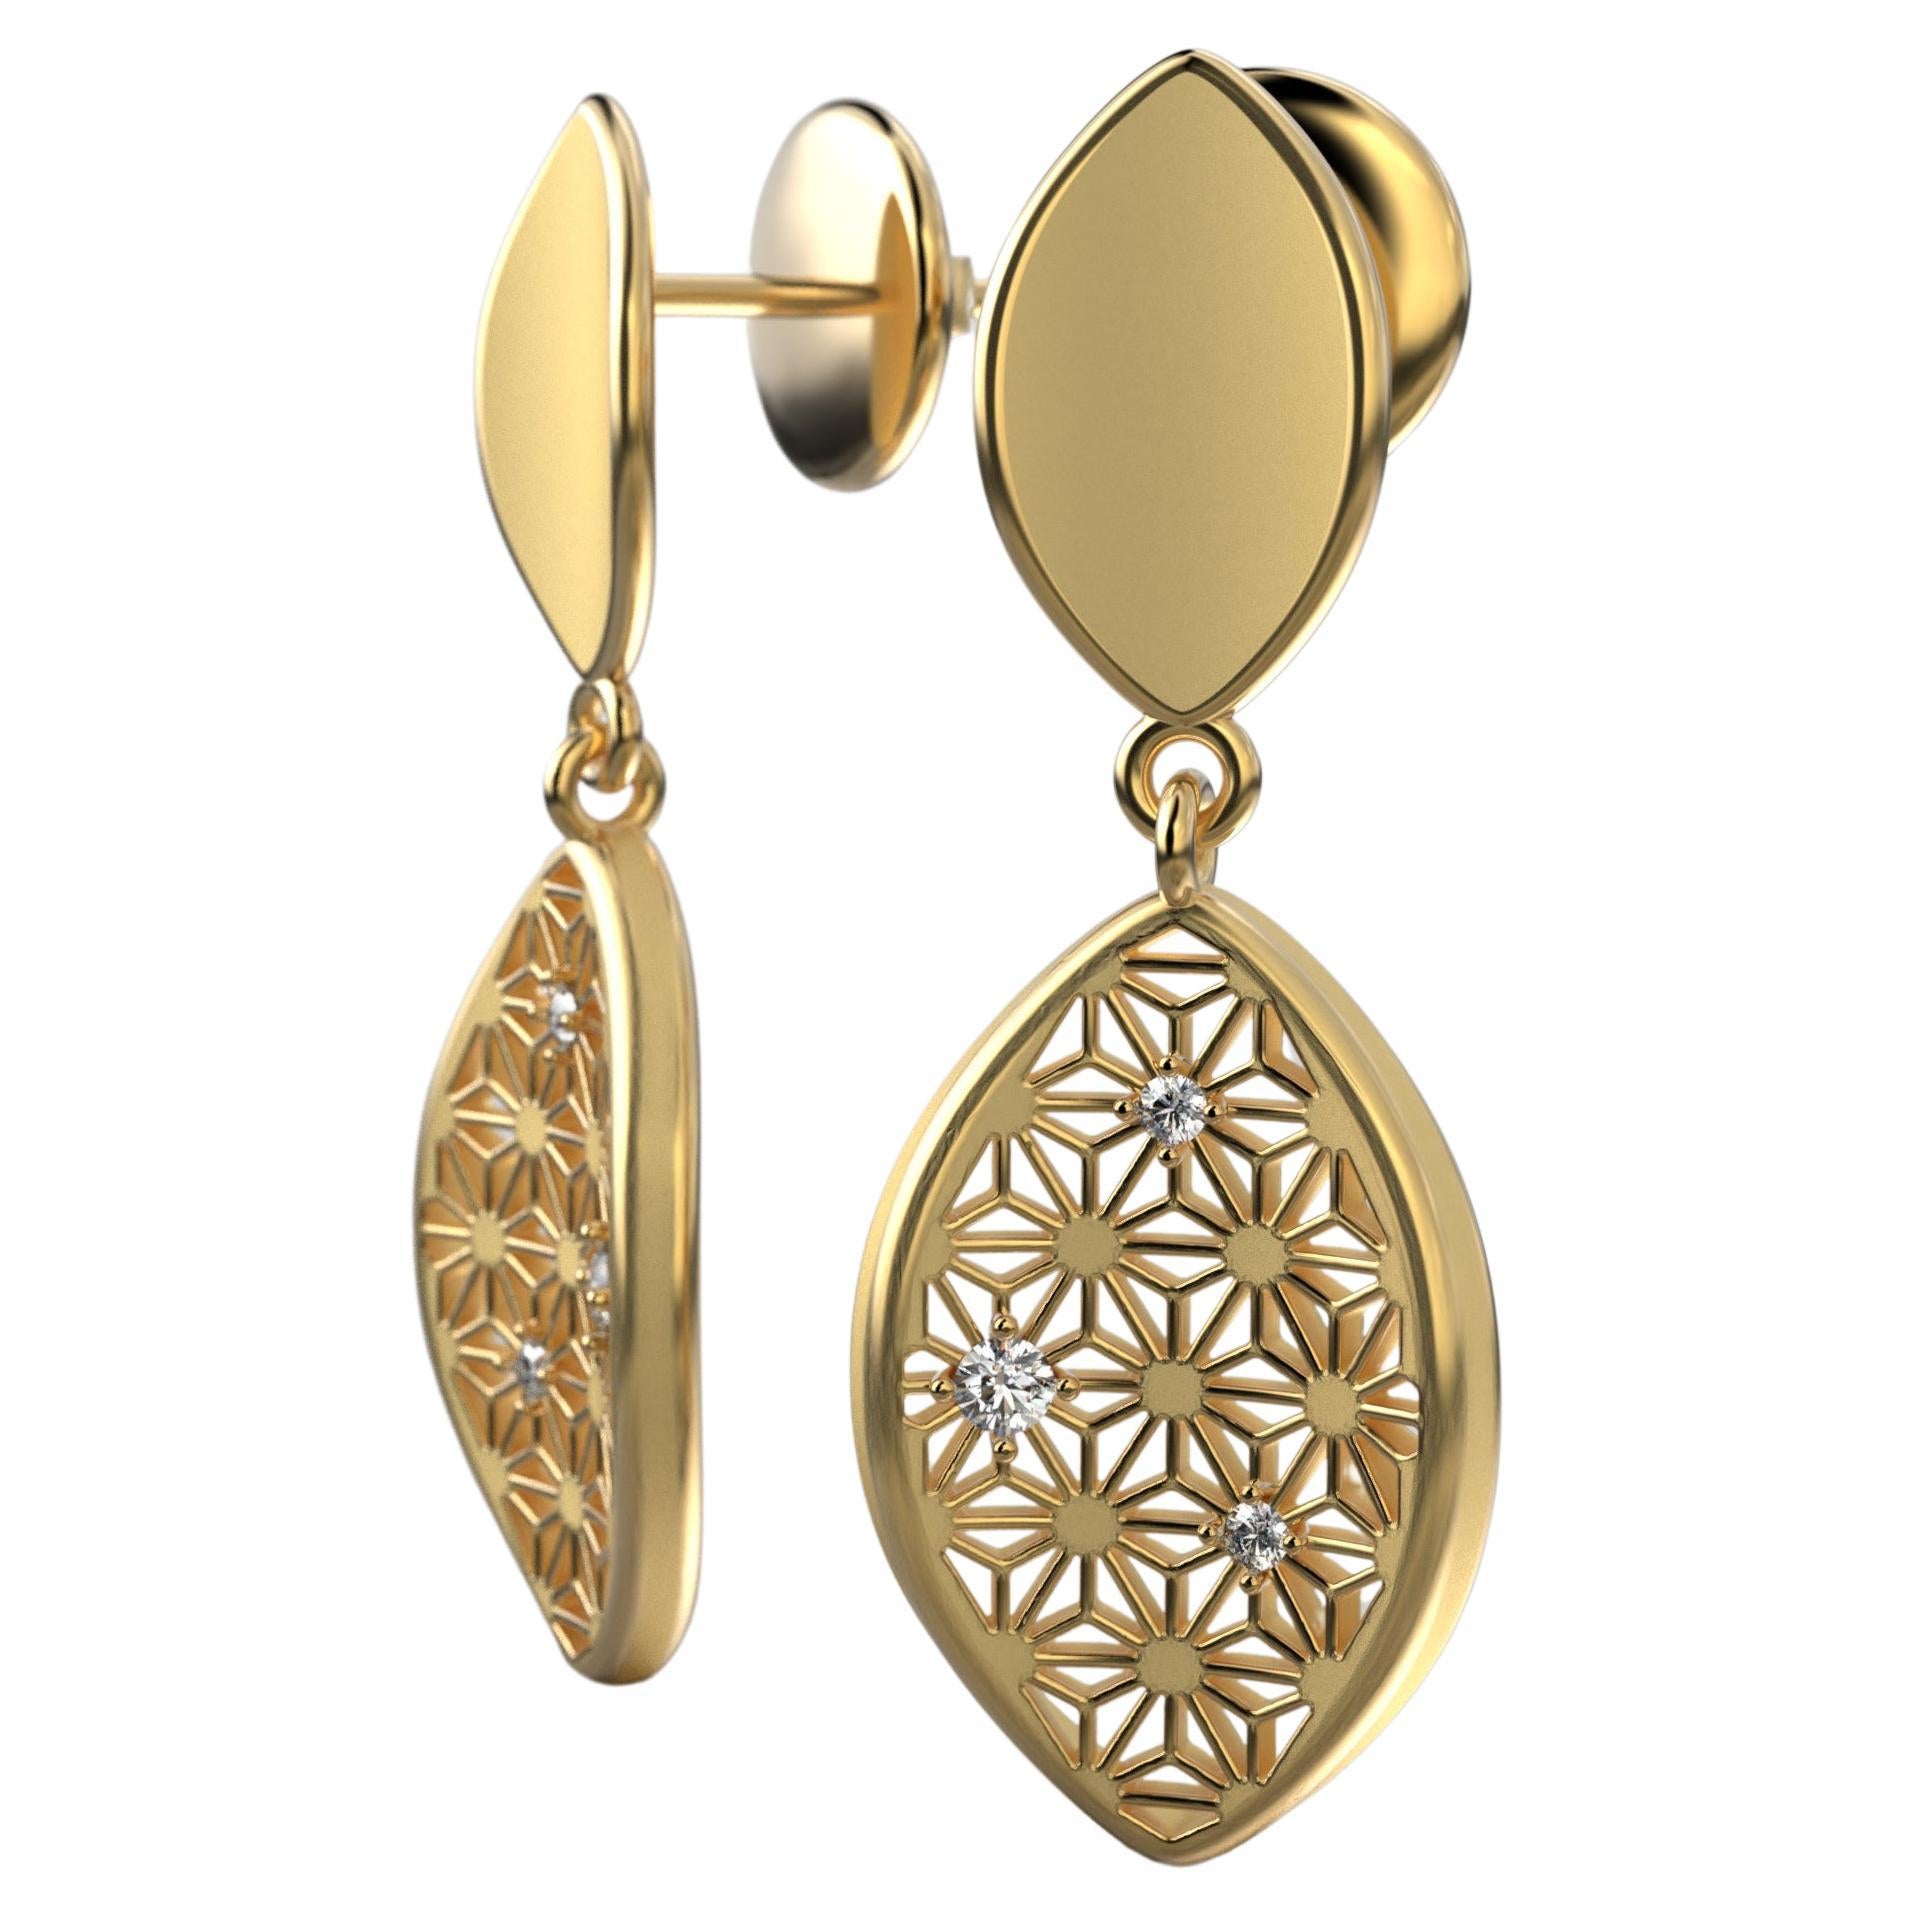 Only made to order Jewelry. Discover exquisite Italian Gold Diamond Earrings made in Italy. Our collection features stunning Natural Diamond Earrings, adorned with Sashiko Japanese Pattern for a unique touch. Explore our curated selection of Dangle